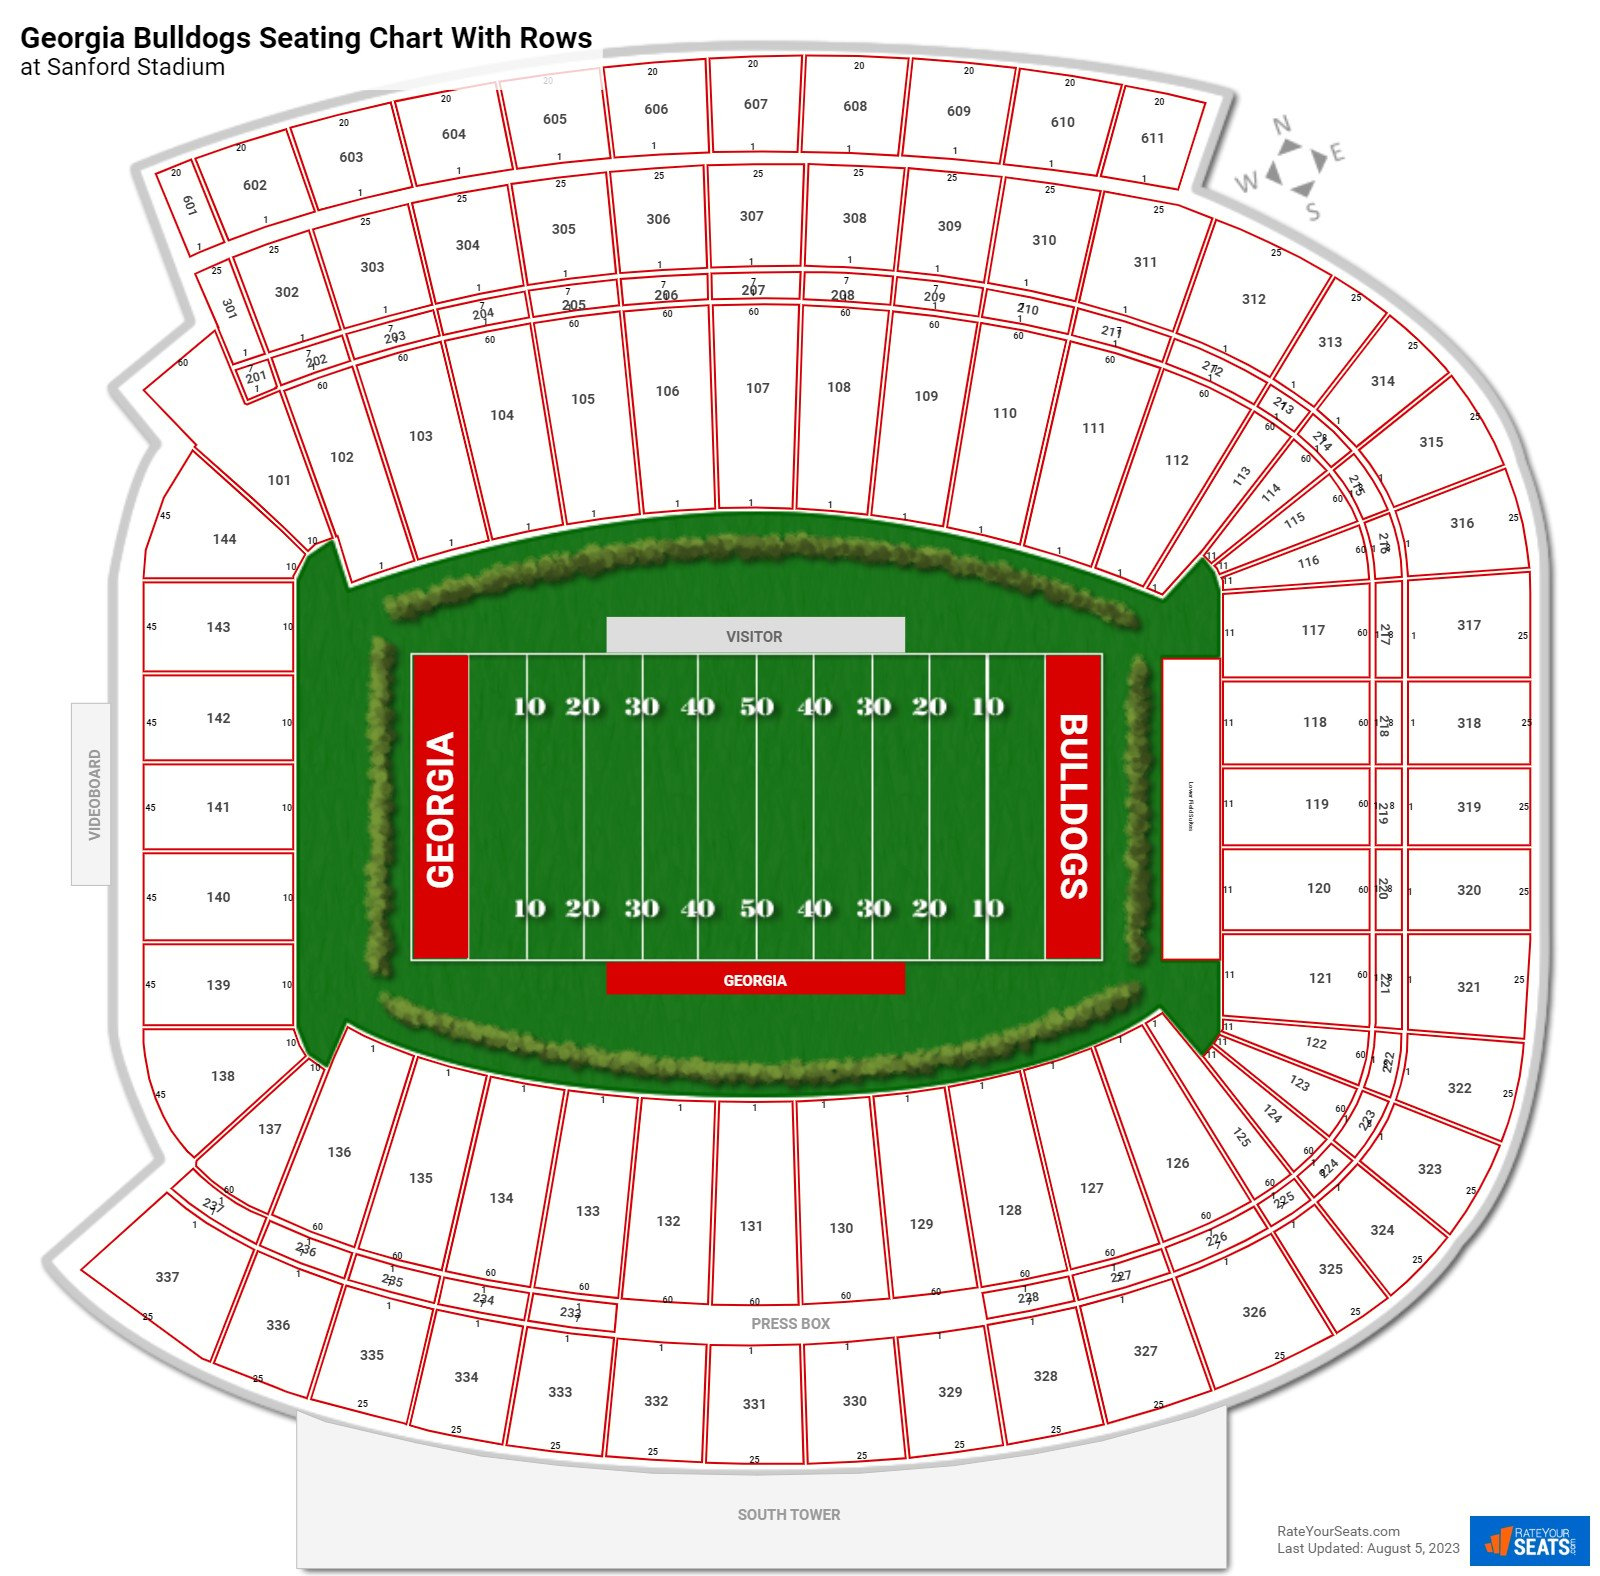 Sanford Stadium seating chart with row numbers